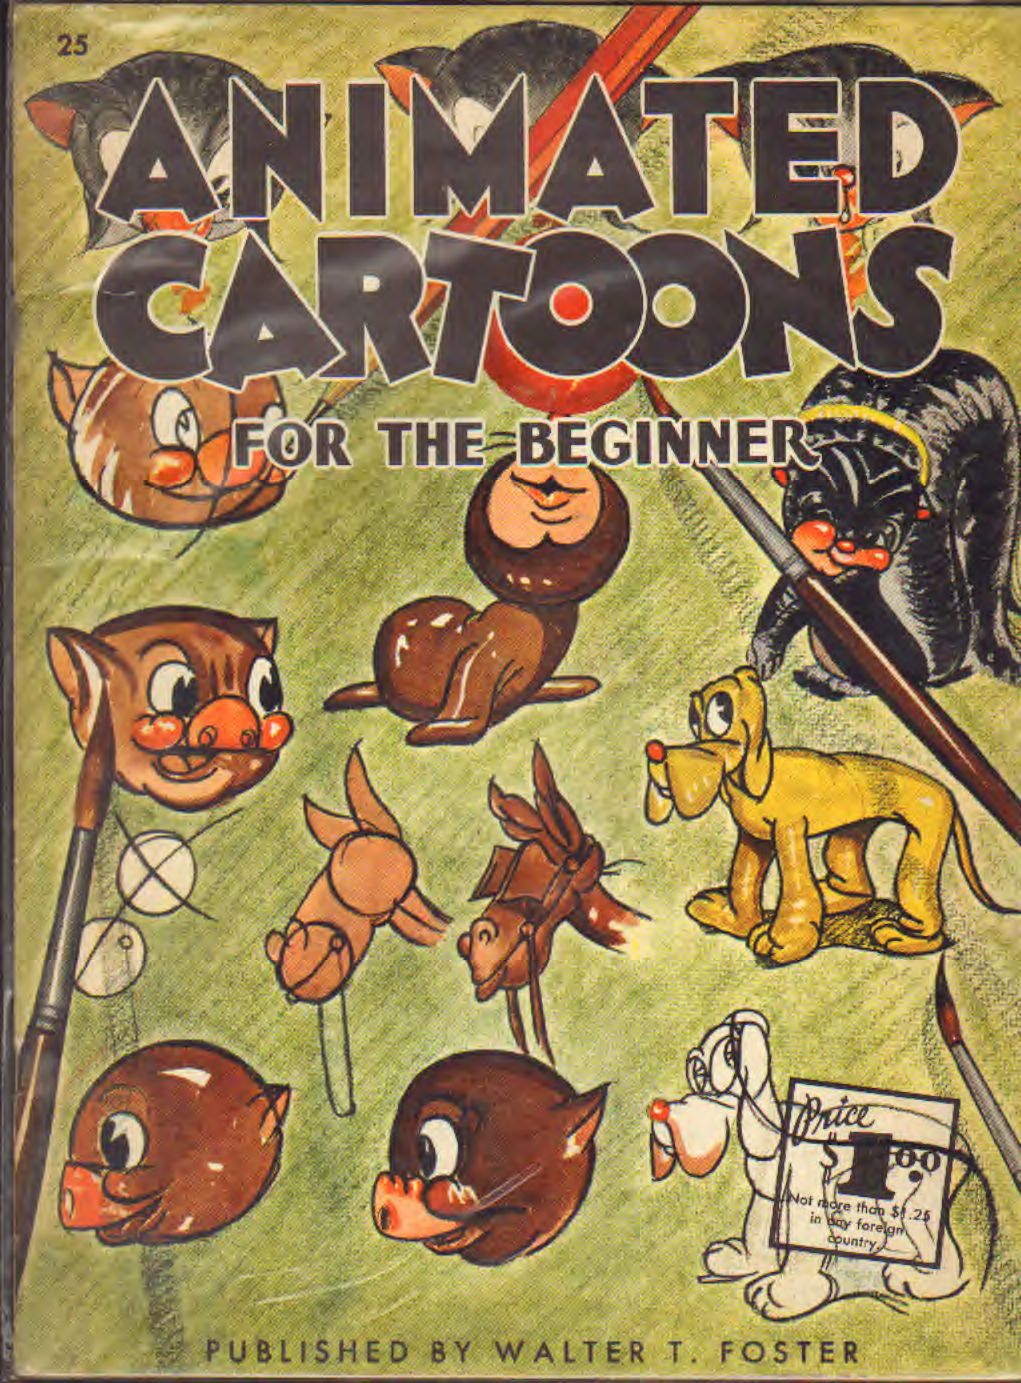 ANIMATED CARTOONS FOR THE BEGINNER